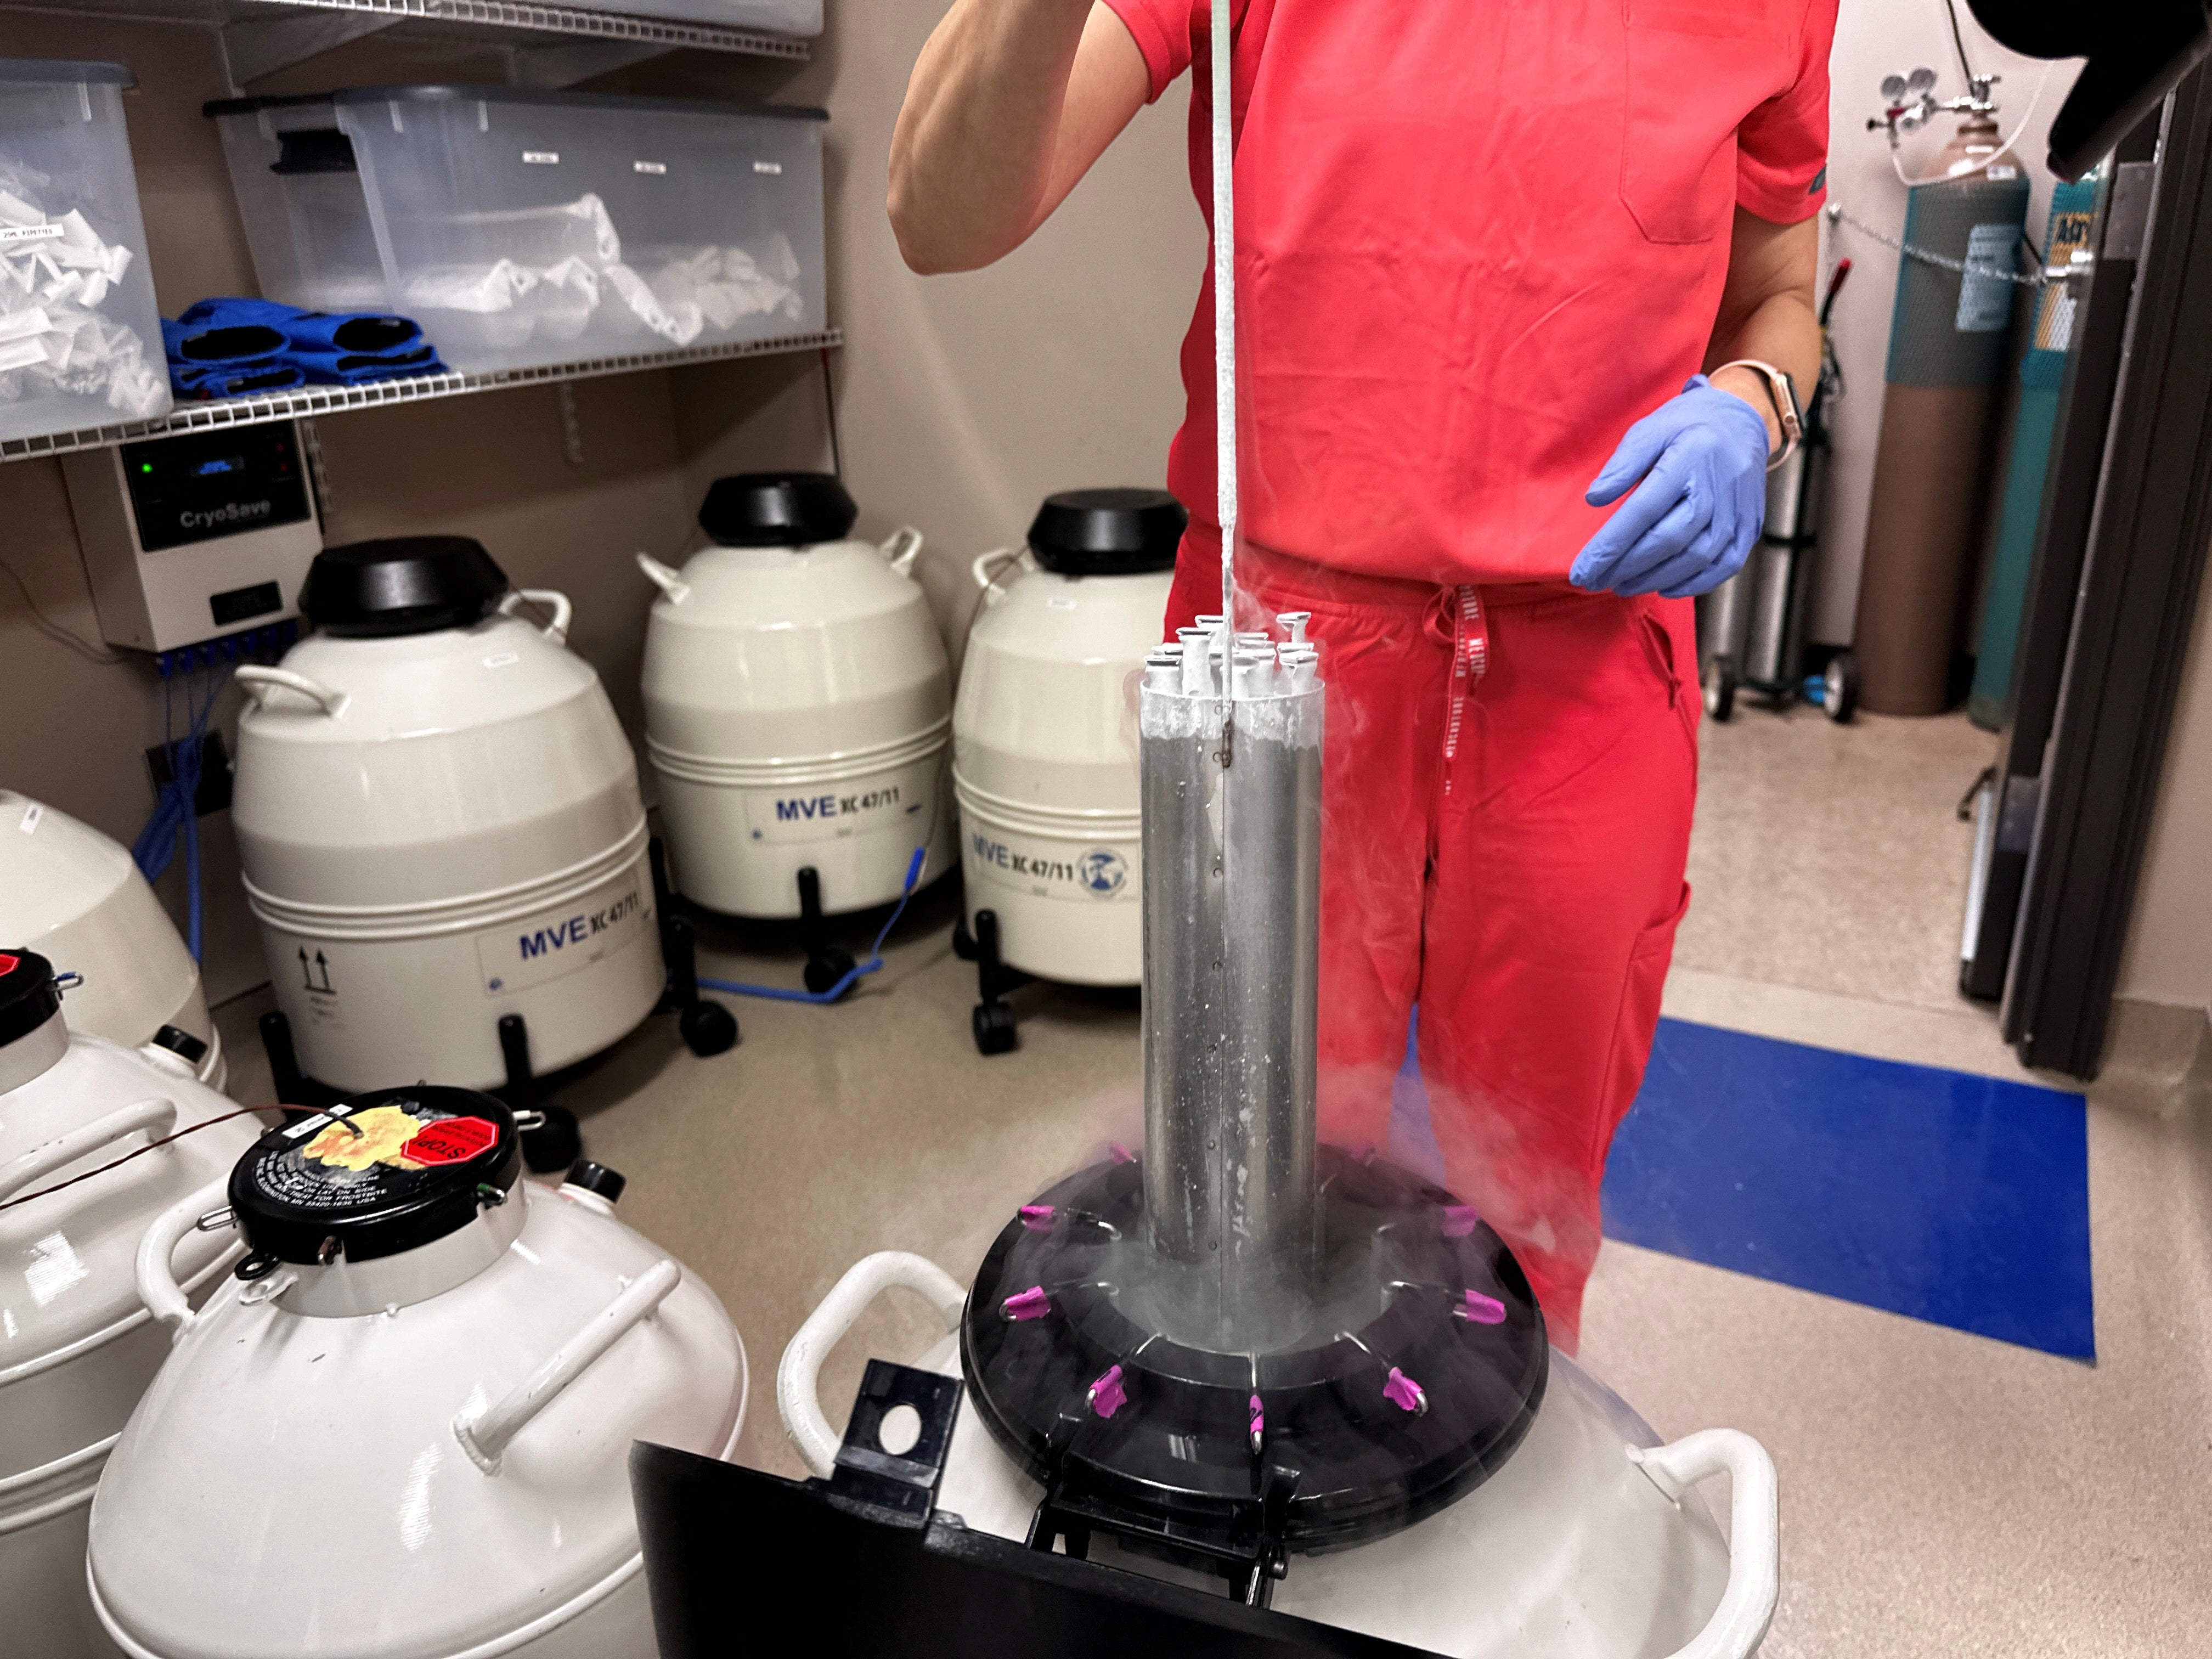 Lynn Curry, nurse practitioner for Huntsville Reproductive Medicine, lifts frozen embryos out of IVF cryopreservation dewar in Madison, Alabama, on 4 March.